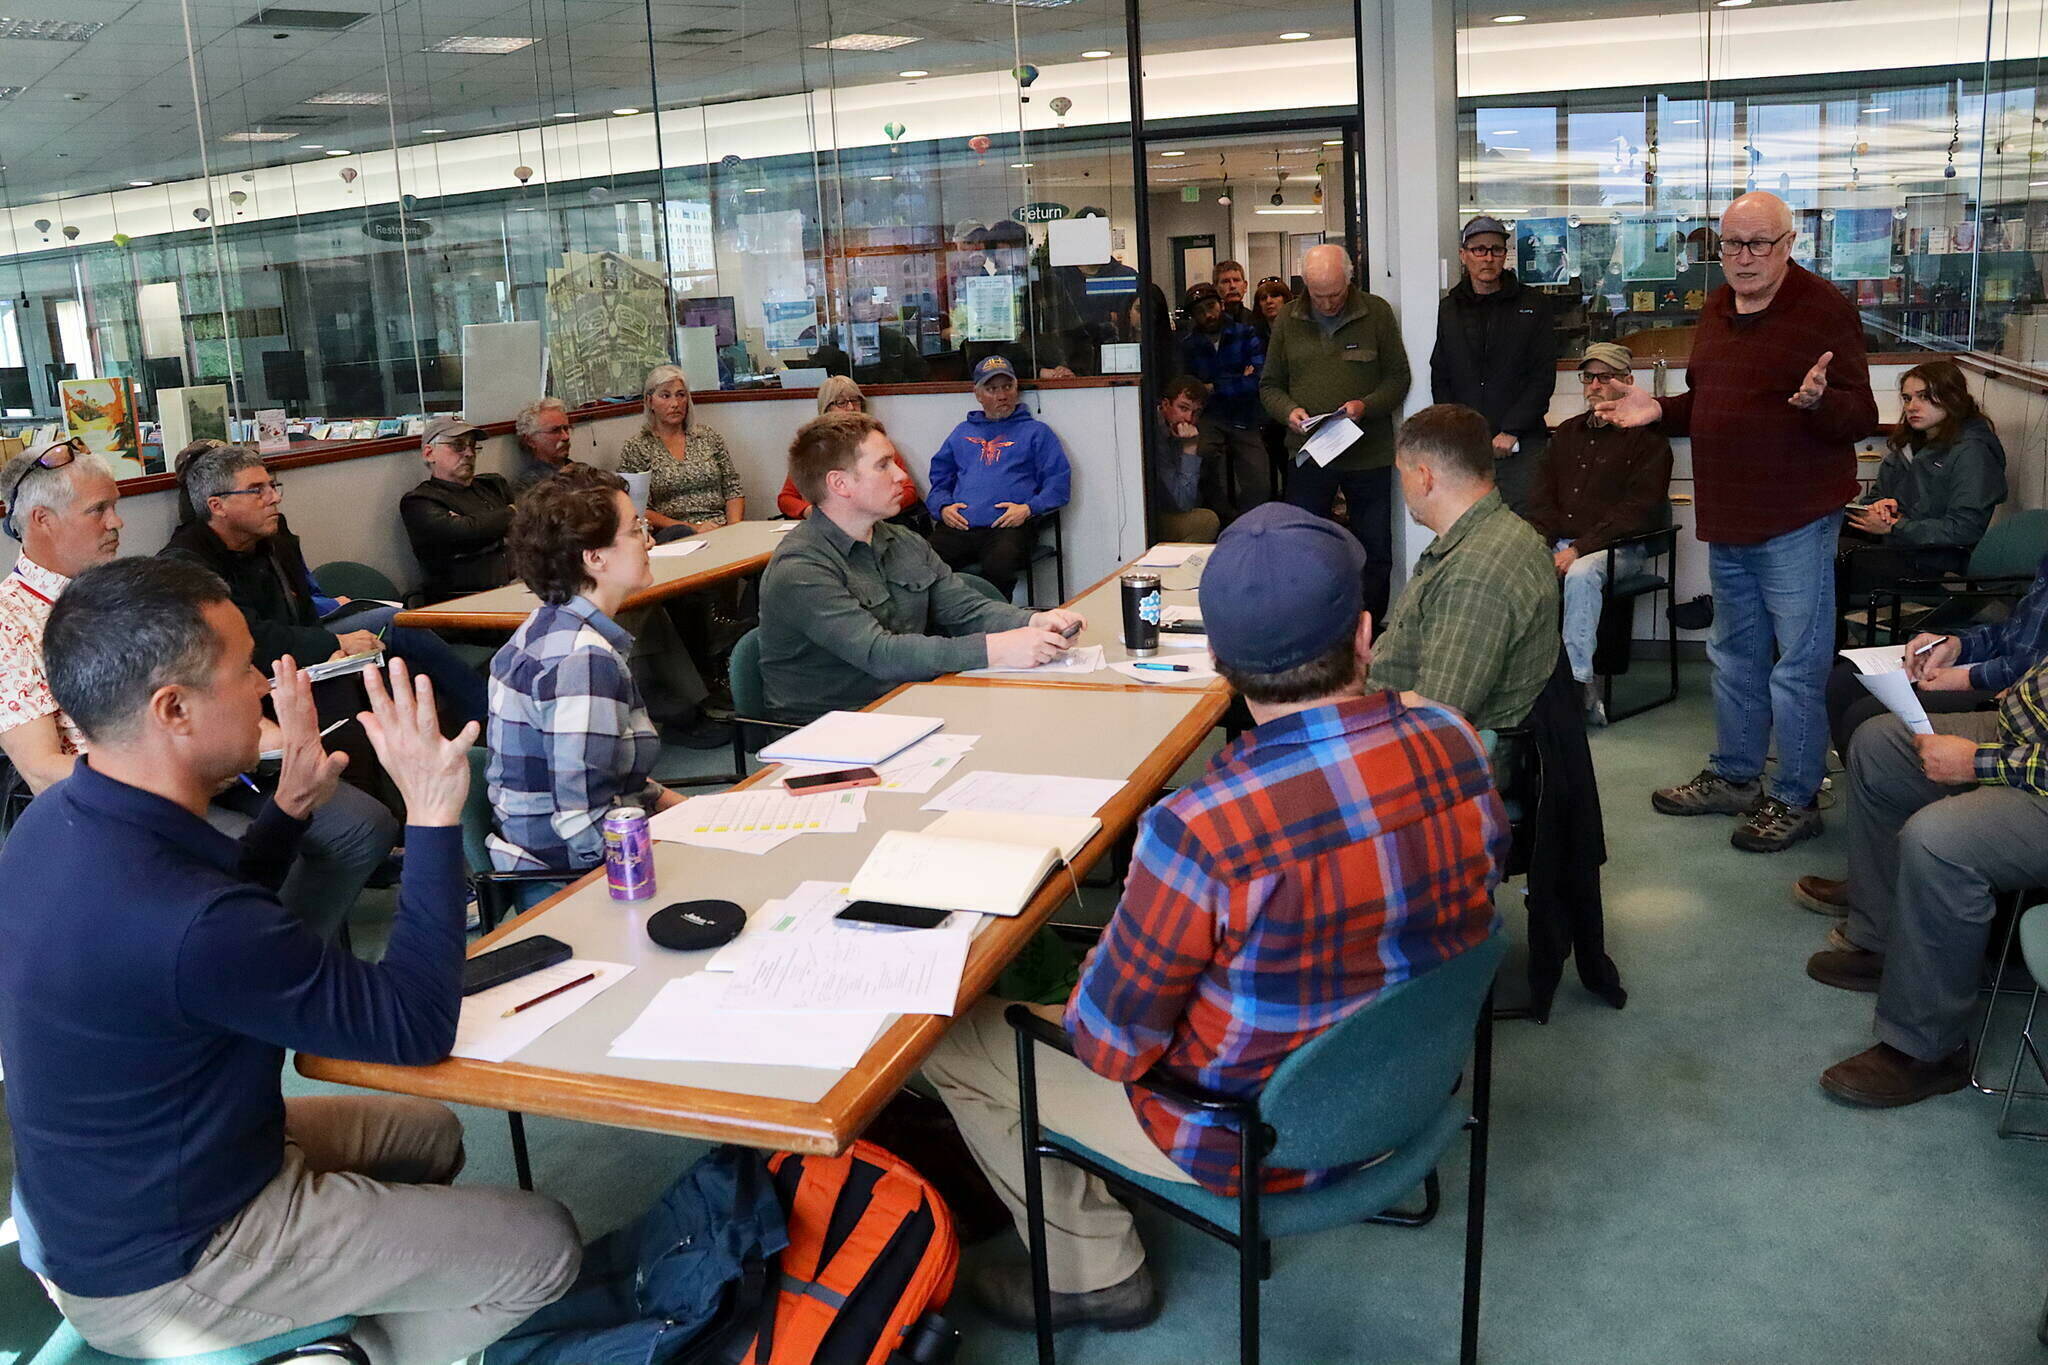 Juneau residents pack a room at the downtown public library for a June 6 meeting of Eaglecrest Ski Area’s board of directors. (Mark Sabbatini / Juneau Empire file photo)